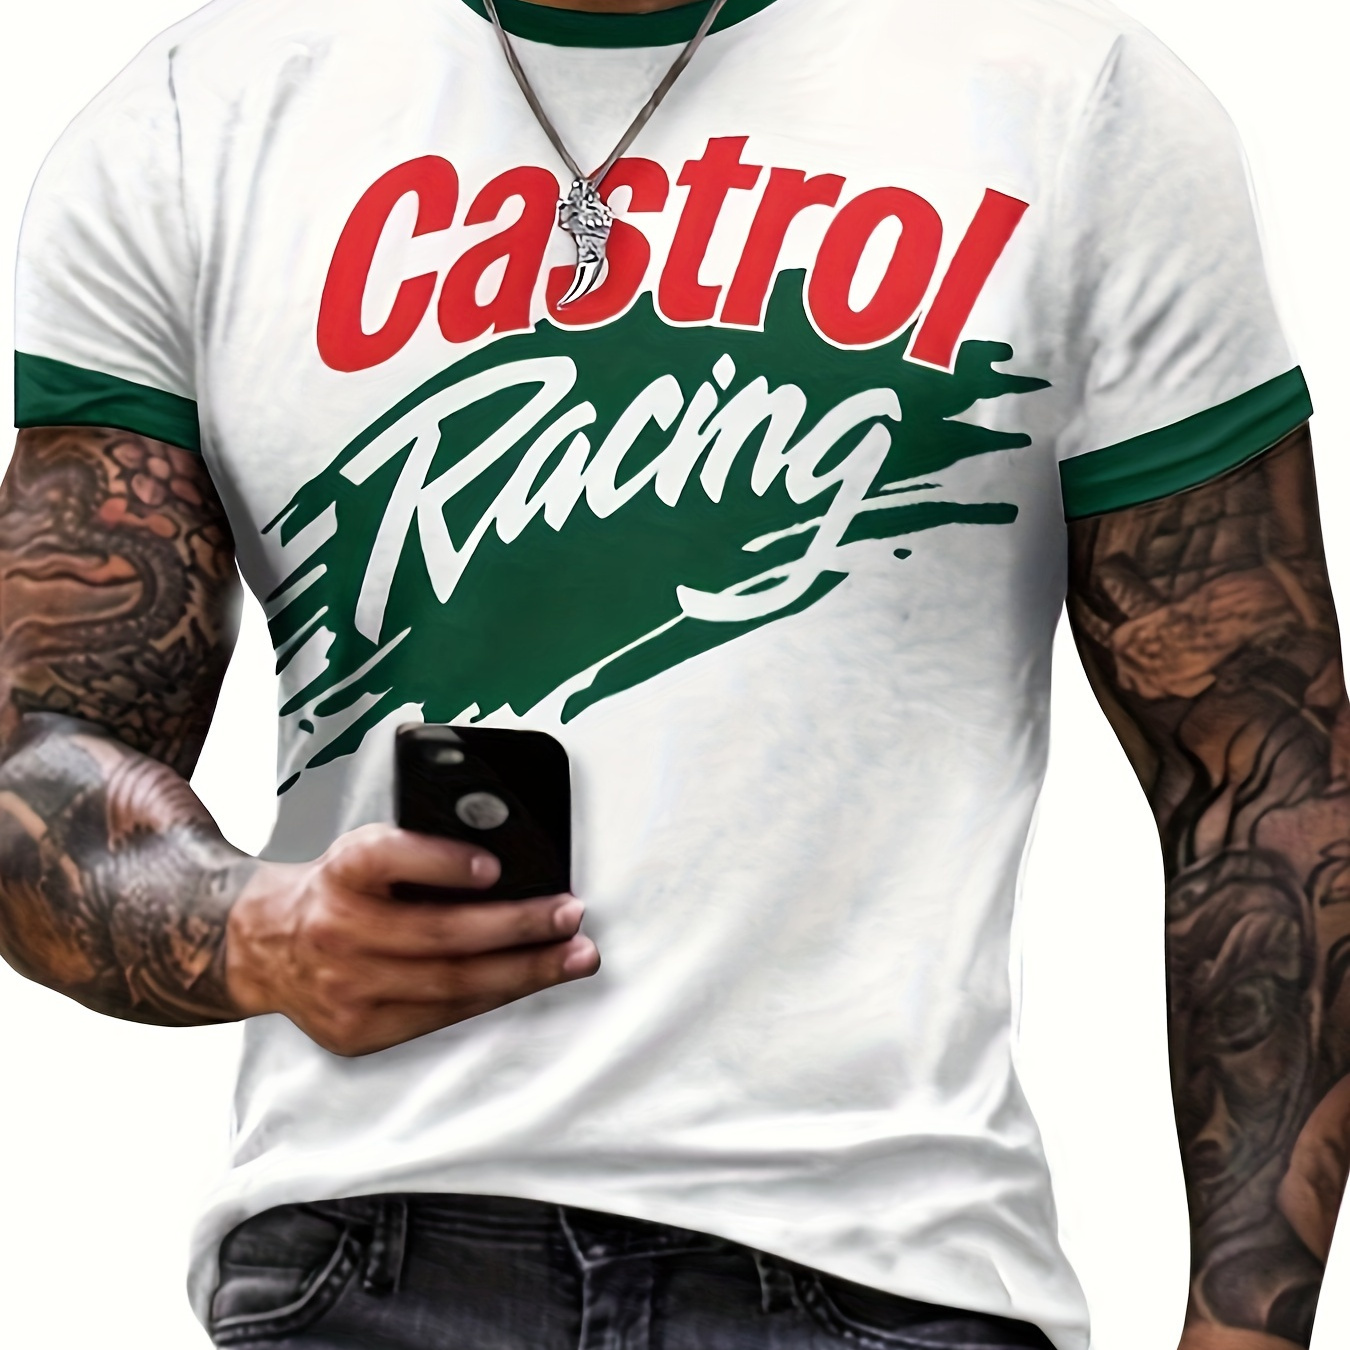 

Men's Trendy Casual Crew Neck Graphic T-shirt With Exquisite Letter Prints For Summer Daily Wear